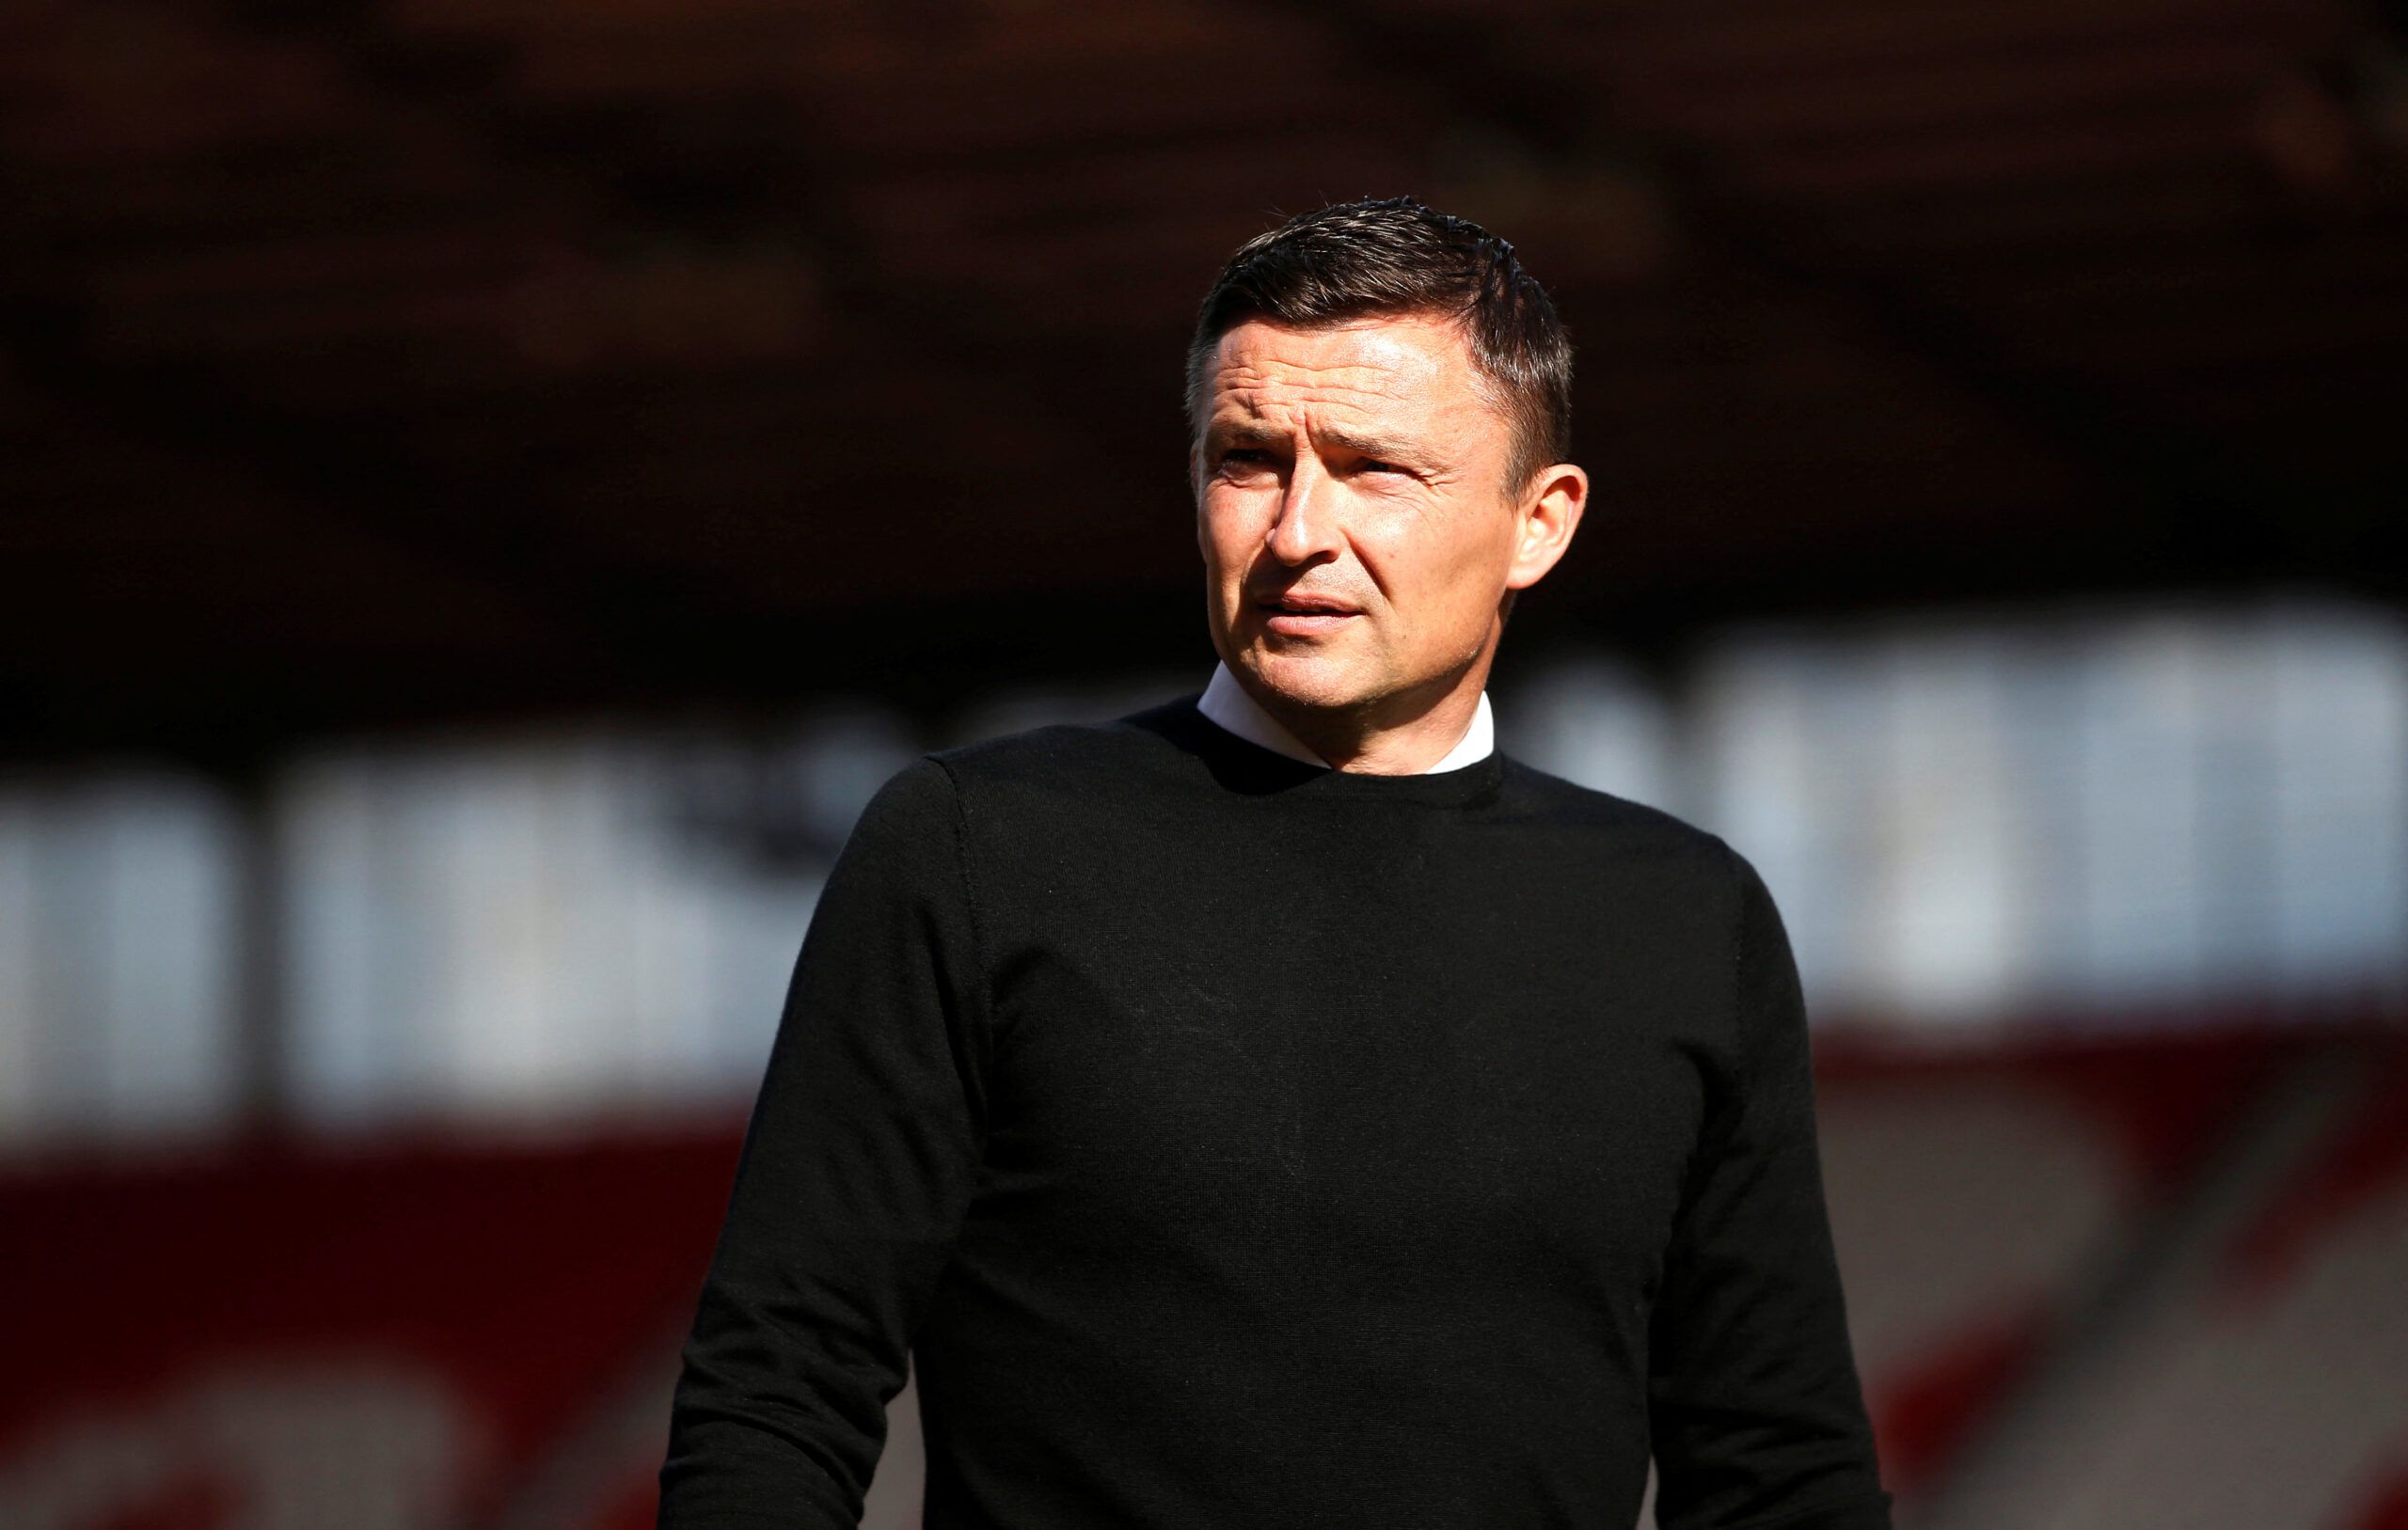 Soccer Football - Championship - Stoke City v Sheffield United - bet365 Stadium, Stoke-on-Trent, Britain - October 8, 2022 Sheffield United manager Paul Heckingbottom before the match   Action Images/Craig Brough  EDITORIAL USE ONLY. No use with unauthorized audio, video, data, fixture lists, club/league logos or 